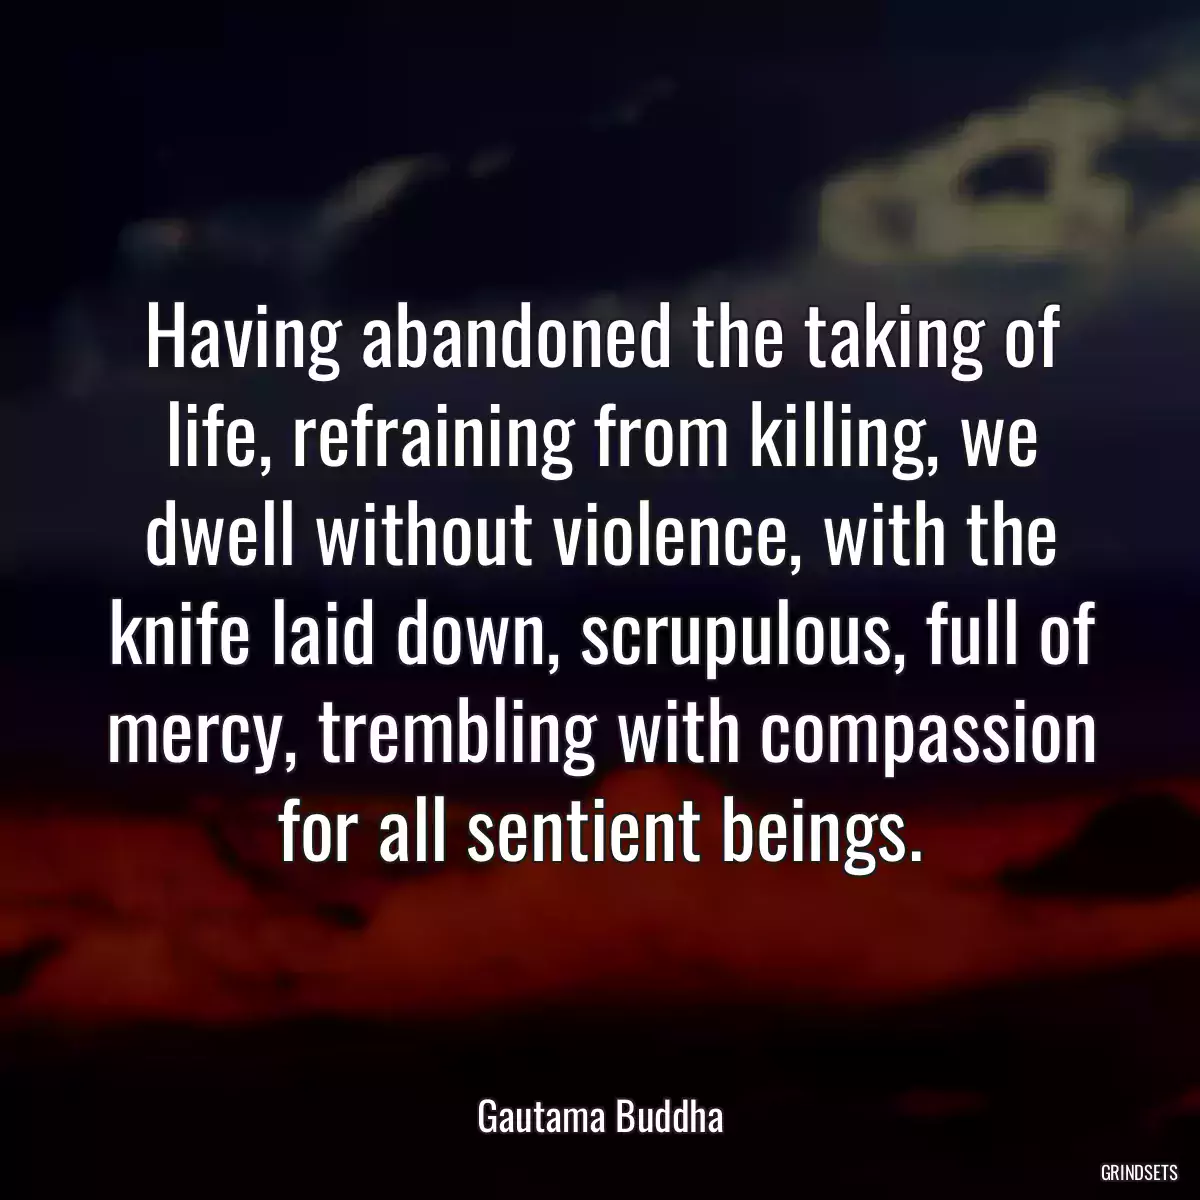 Having abandoned the taking of life, refraining from killing, we dwell without violence, with the knife laid down, scrupulous, full of mercy, trembling with compassion for all sentient beings.